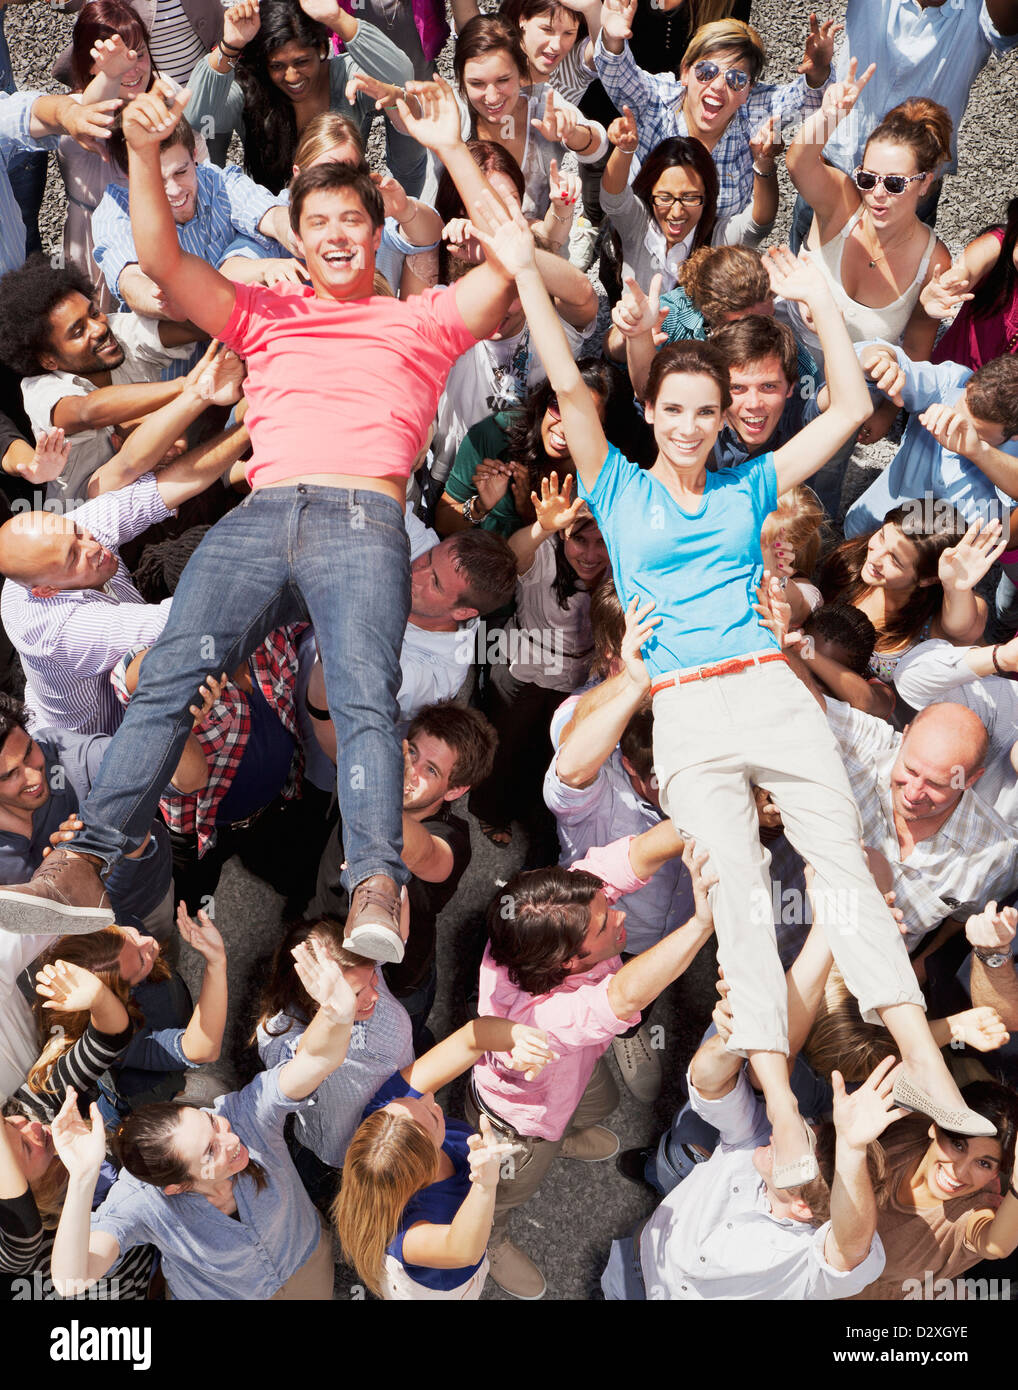 Portrait of man and woman crowd surfing Banque D'Images